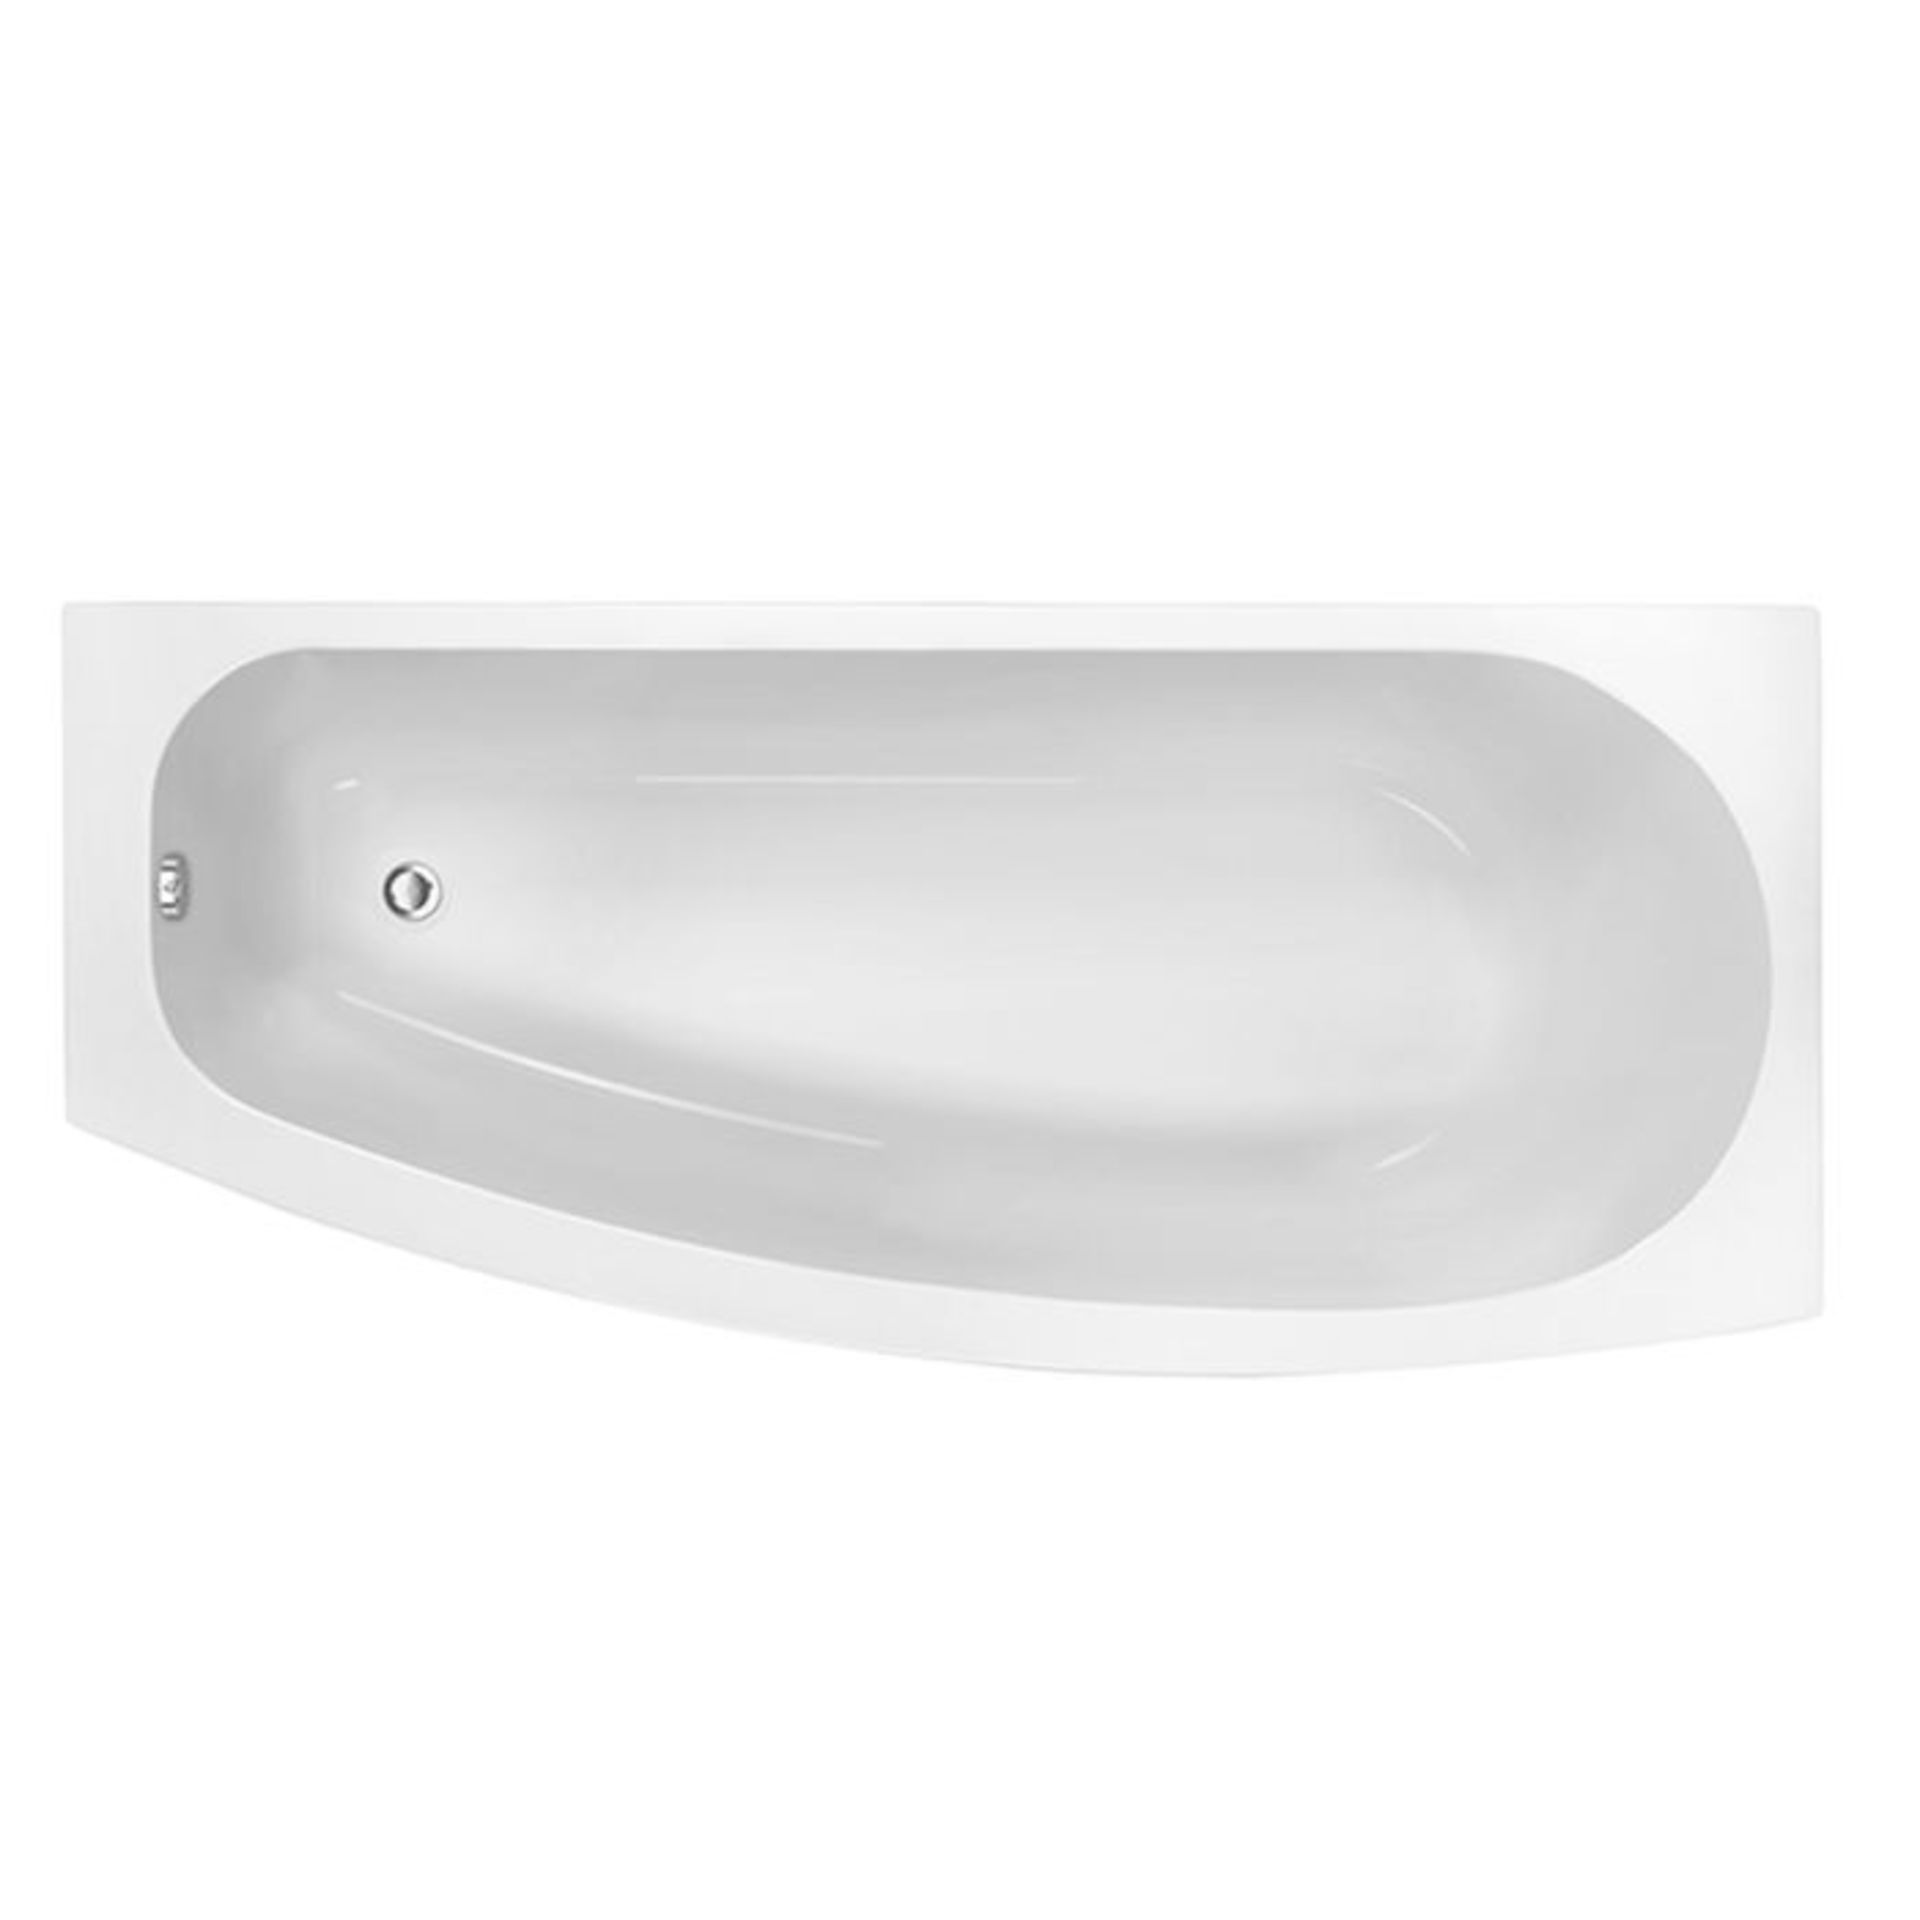 (TY173) 1700mm Left Hand Space Saver Shower Bath, Screen, Rail & Front Panel (Excludes End Panel). - Image 3 of 3